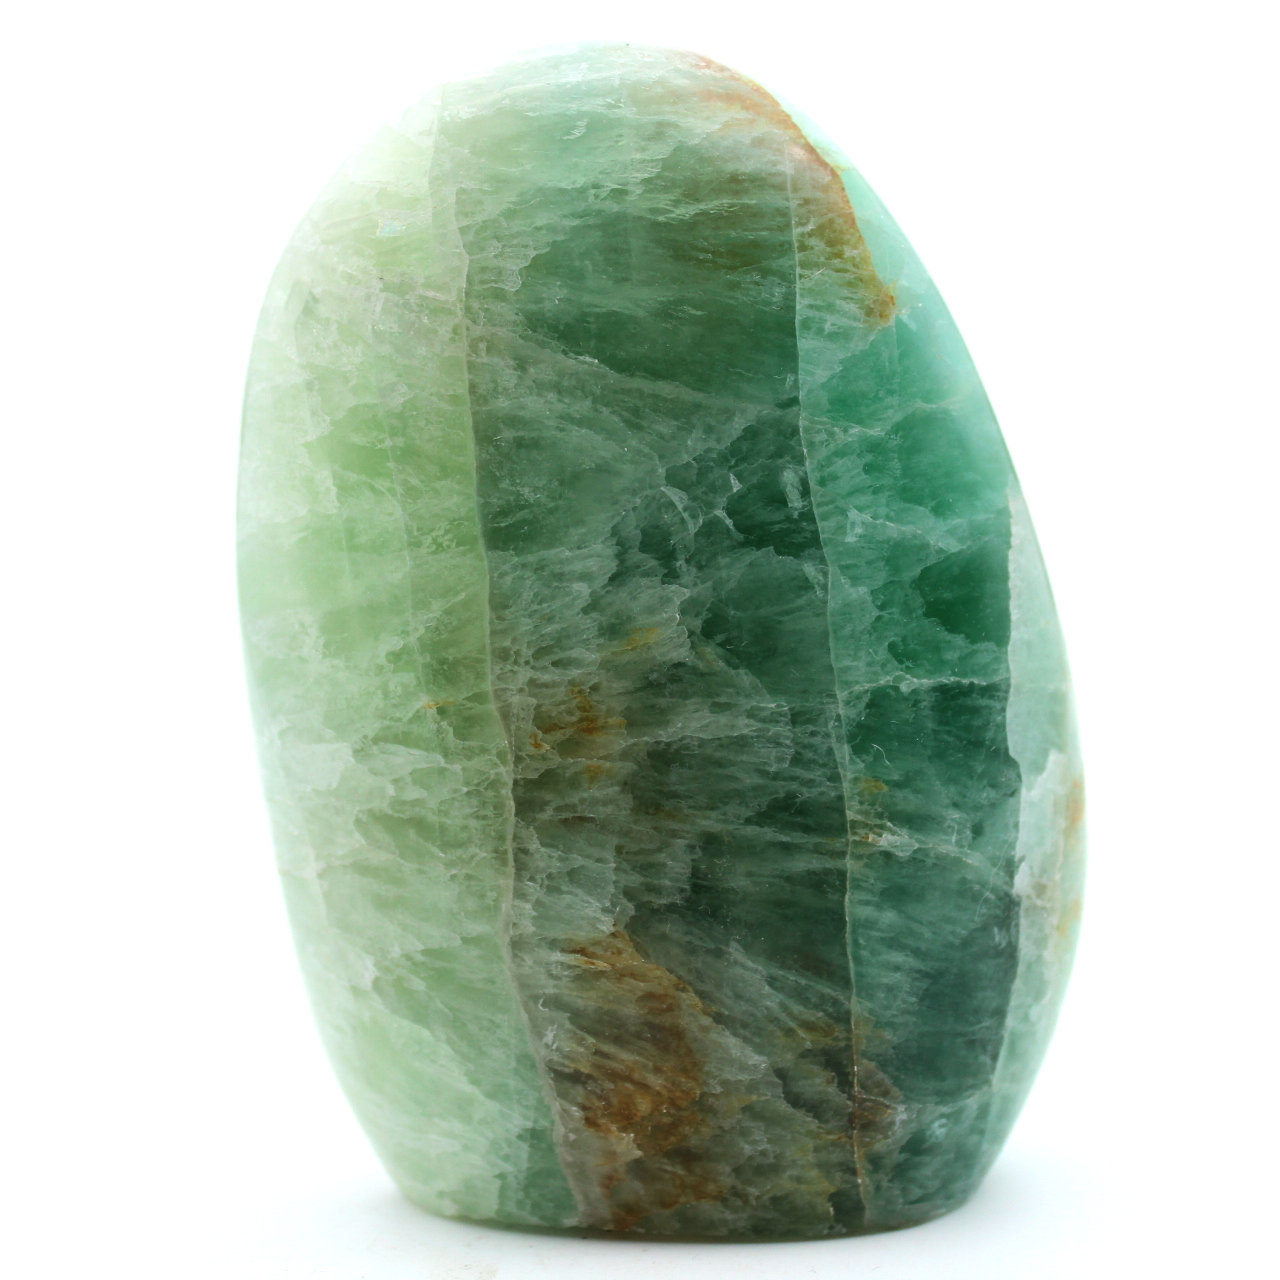 Polished green fluorite from Madagascar